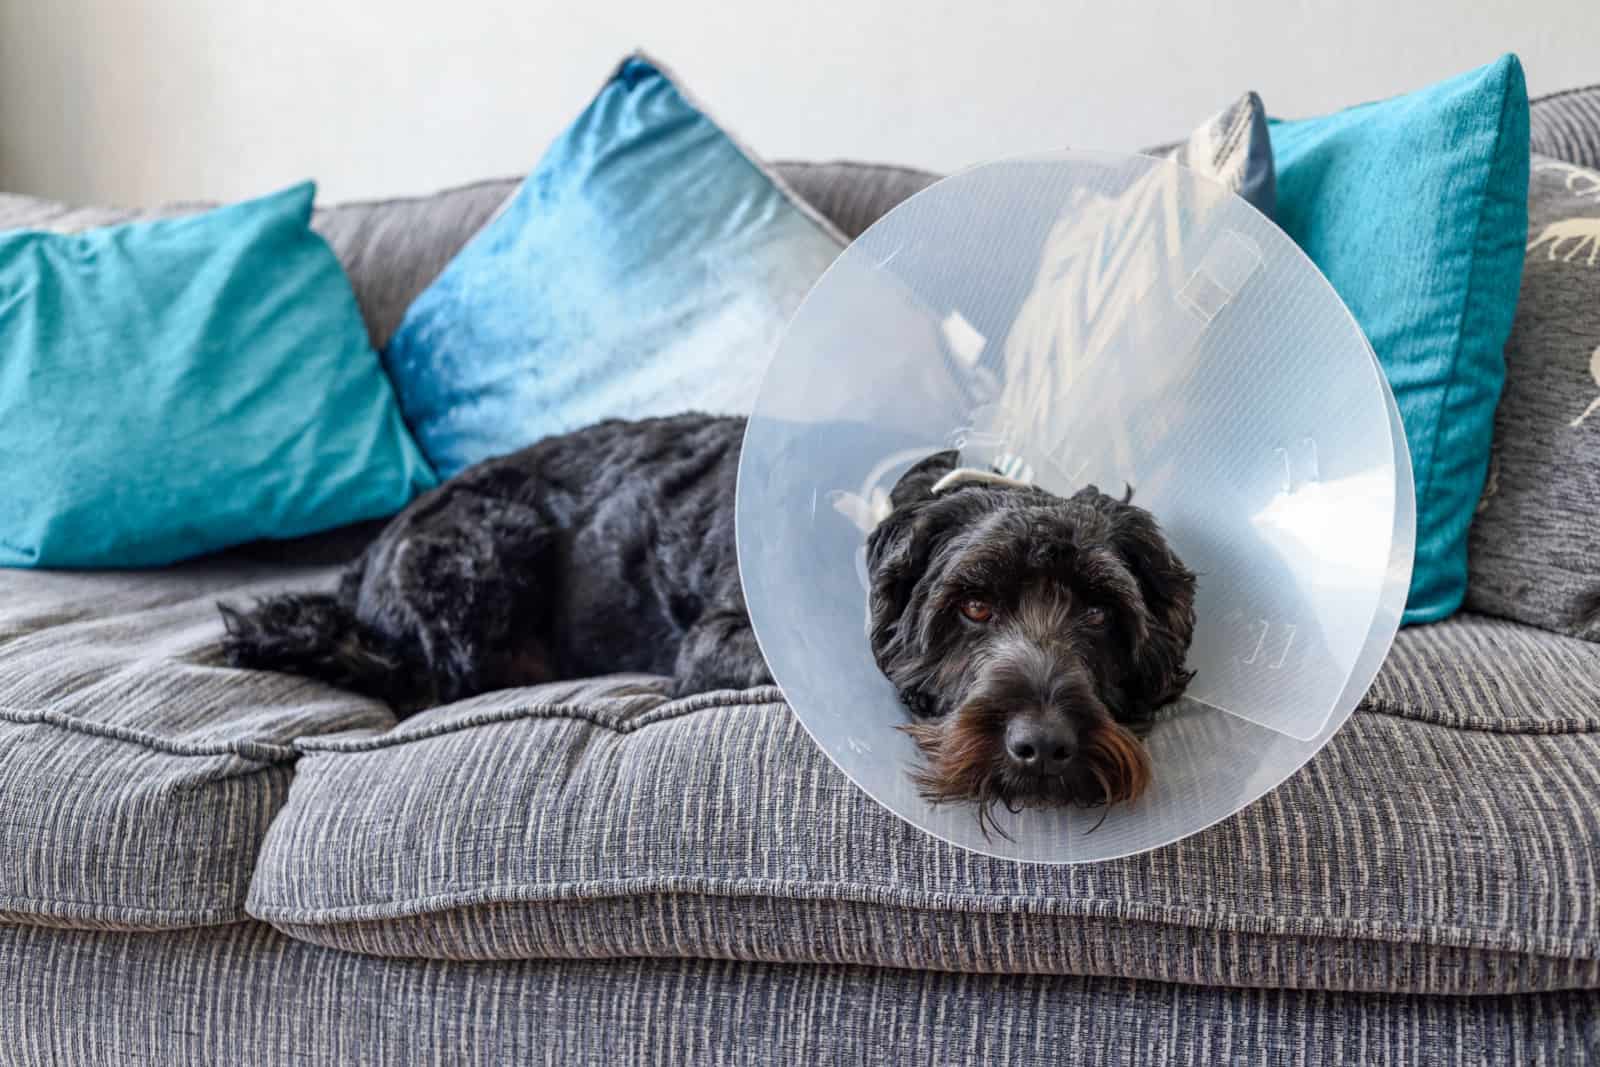 dog with a cone of shame resting on a couch